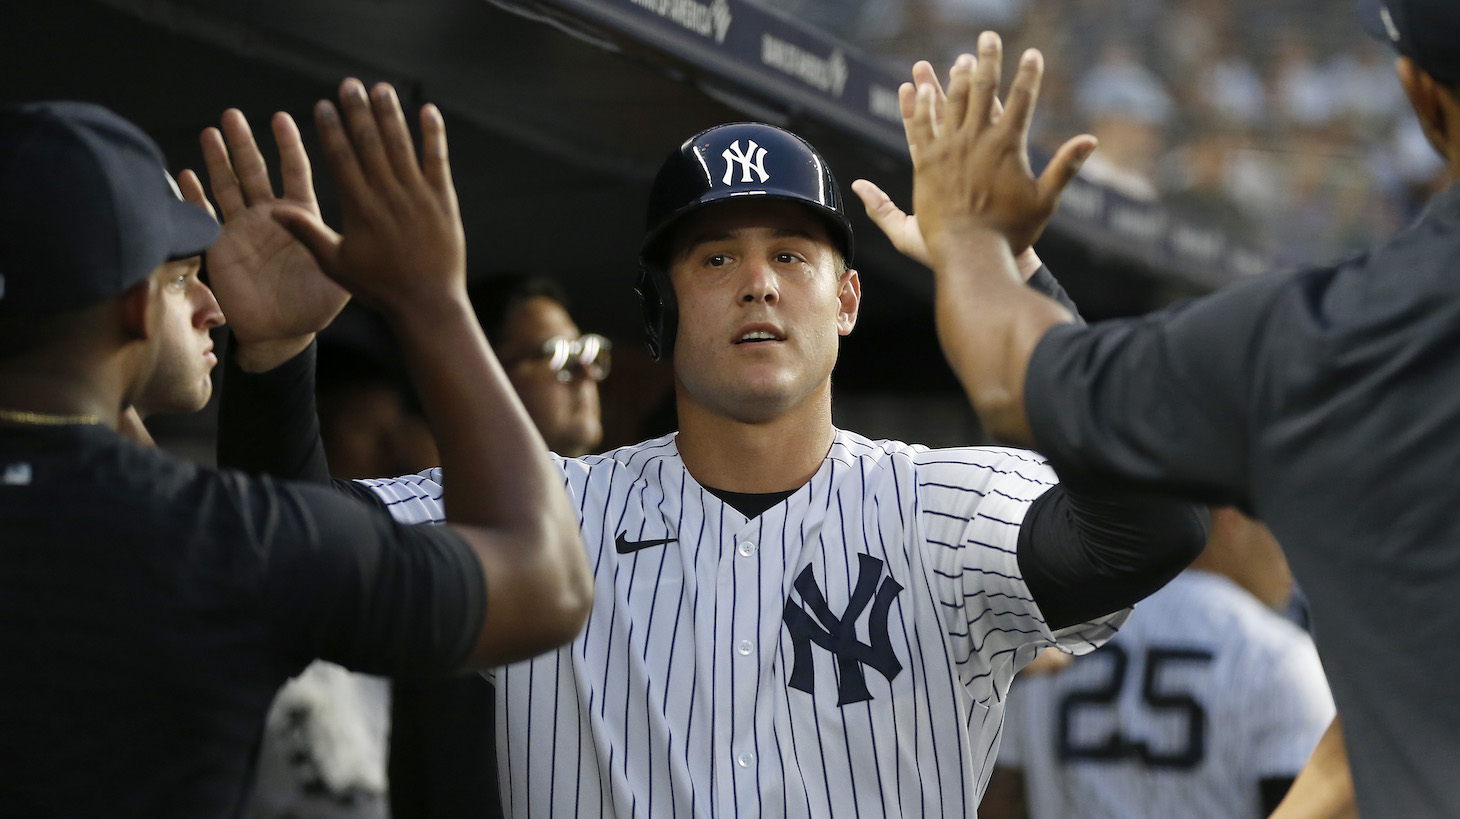 NEW YORK, NEW YORK - AUGUST 03: Anthony Rizzo #48 of the New York Yankees celebrates in the dugout with his teammates after scoring a run during the third inning against the Baltimore Orioles at Yankee Stadium on August 03, 2021 in New York City. (Photo by Jim McIsaac/Getty Images)